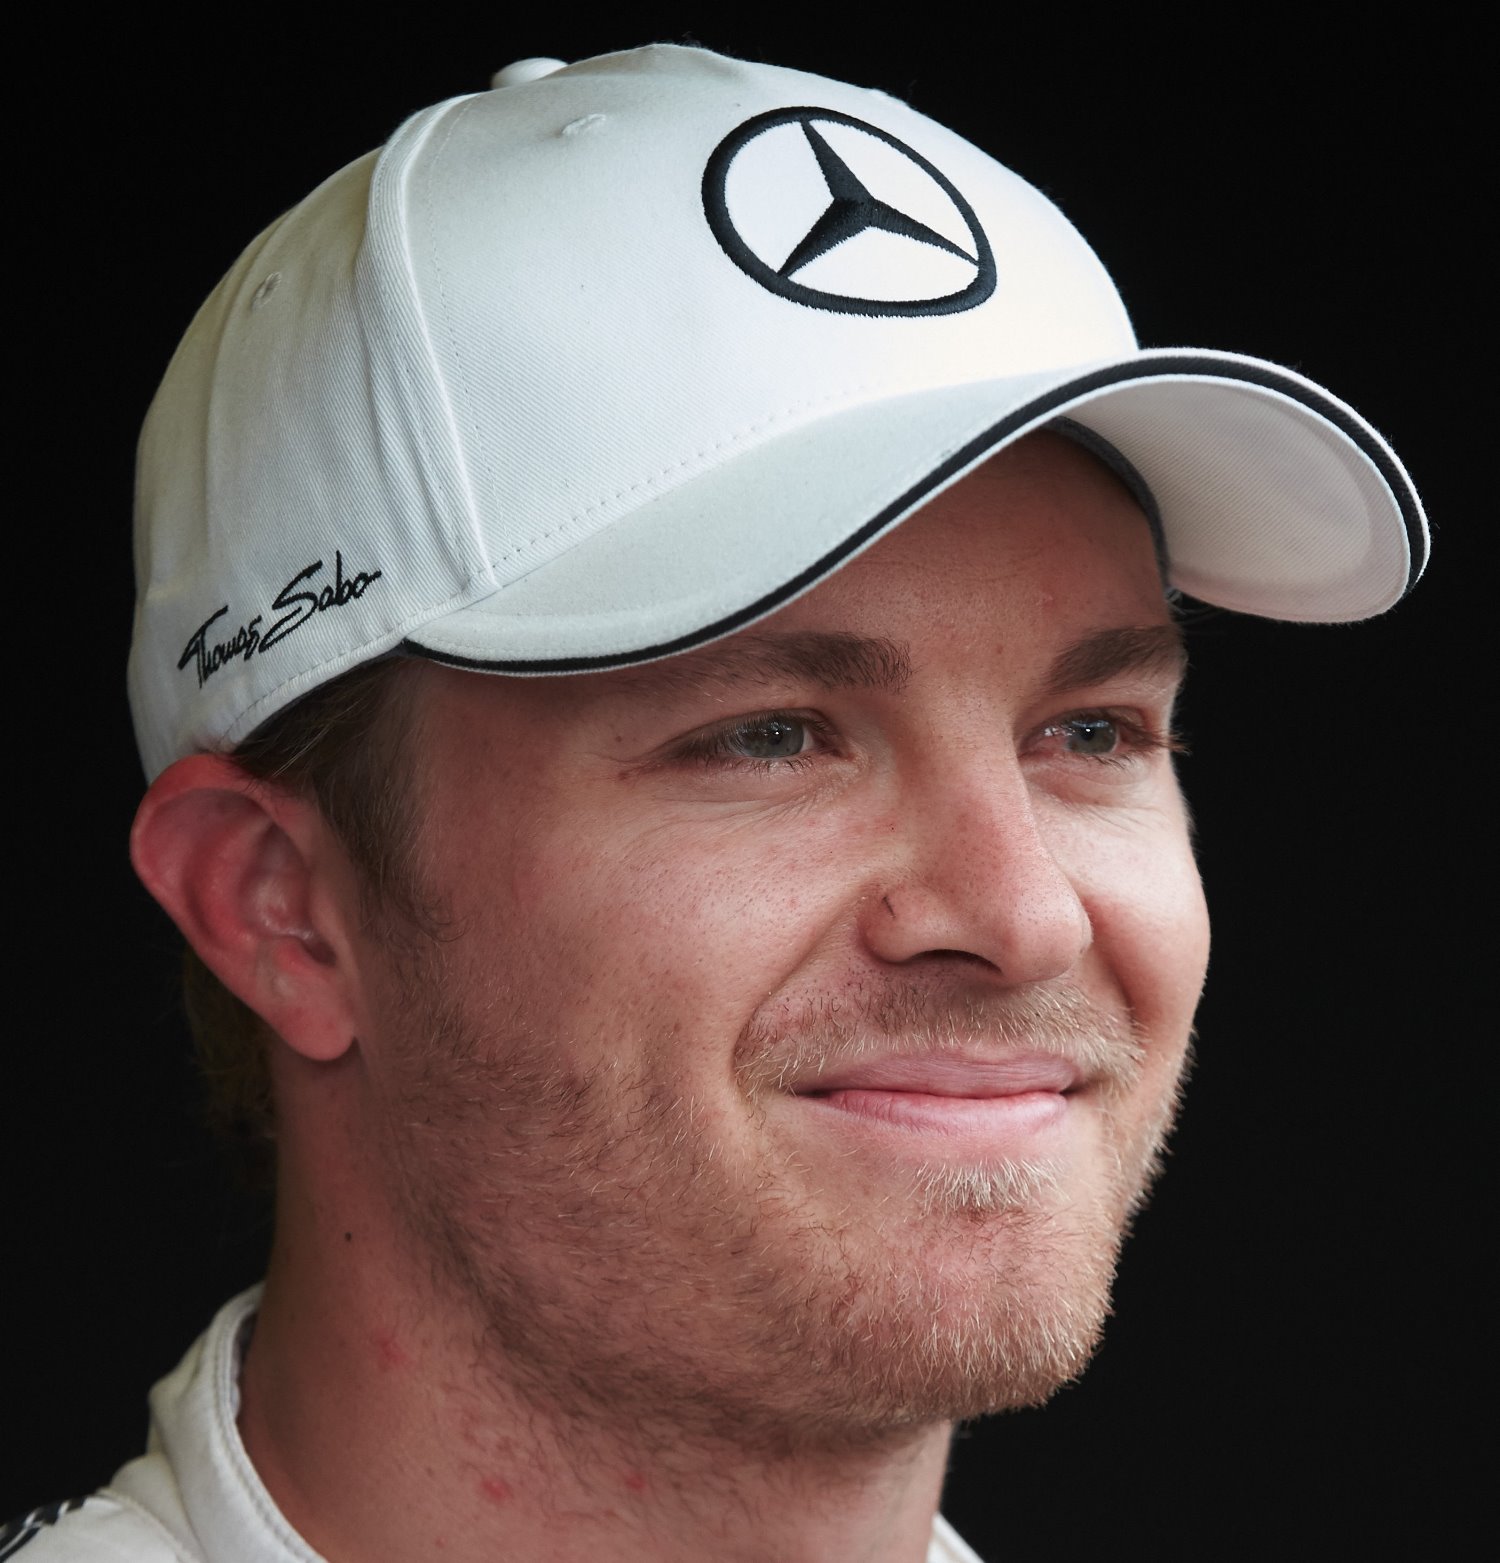 Has Rosberg been chosen by Mercedes to win the 2016 title?